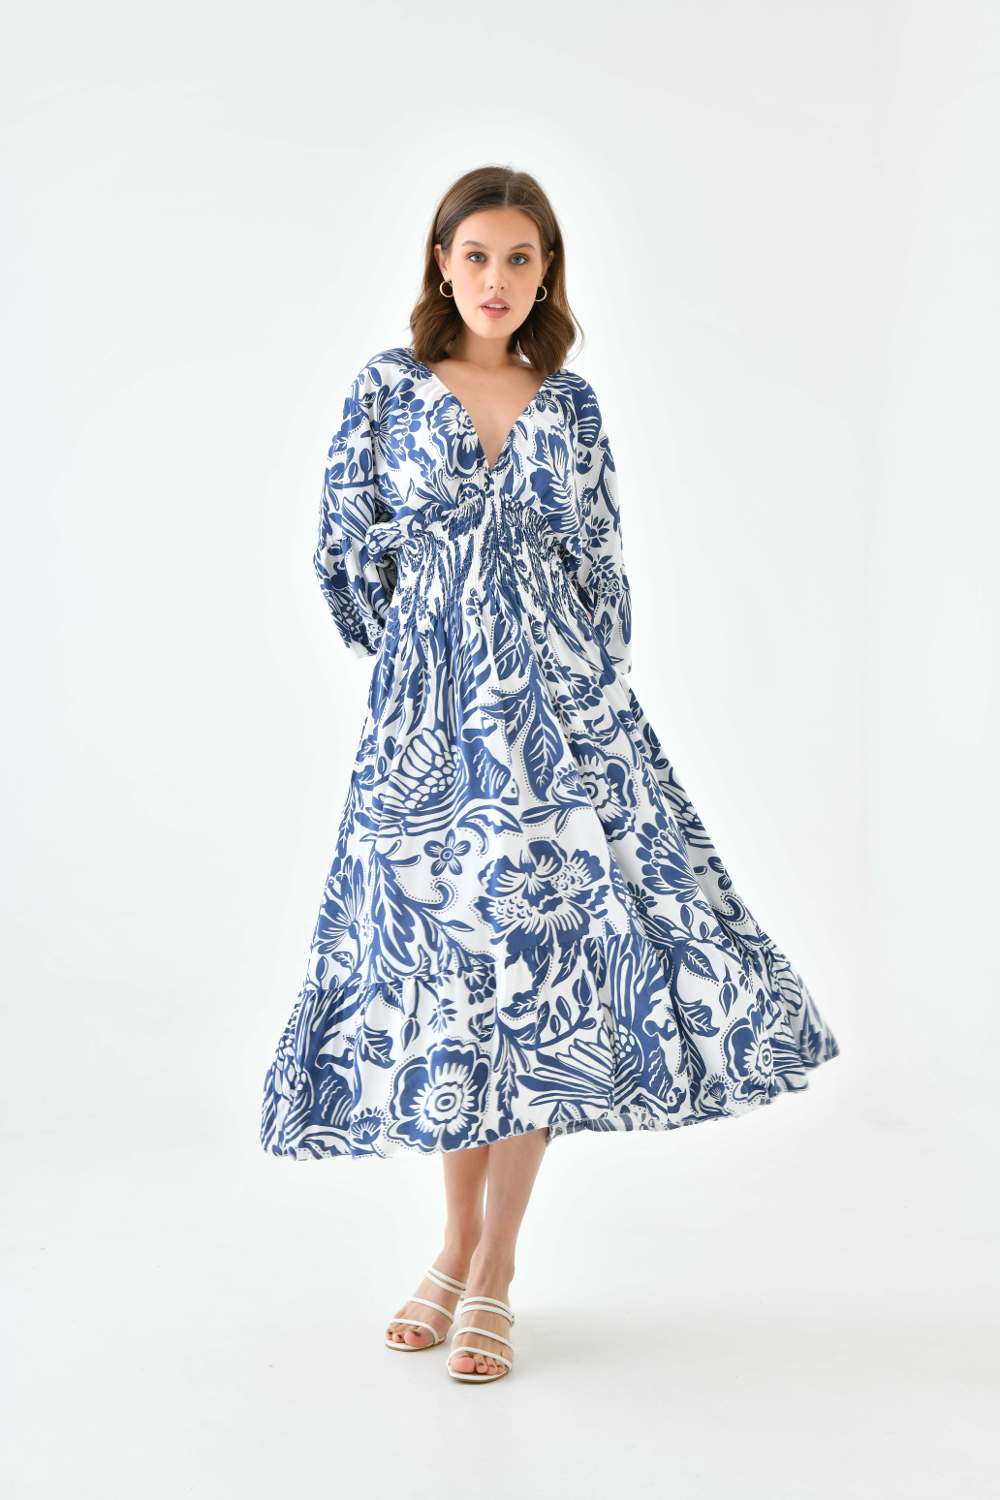 Oversized Flutter Sleeves Shirred Waist V Neck Midi Dress With Floral Print In Navy And White 0191MIDIDRESSNAVY